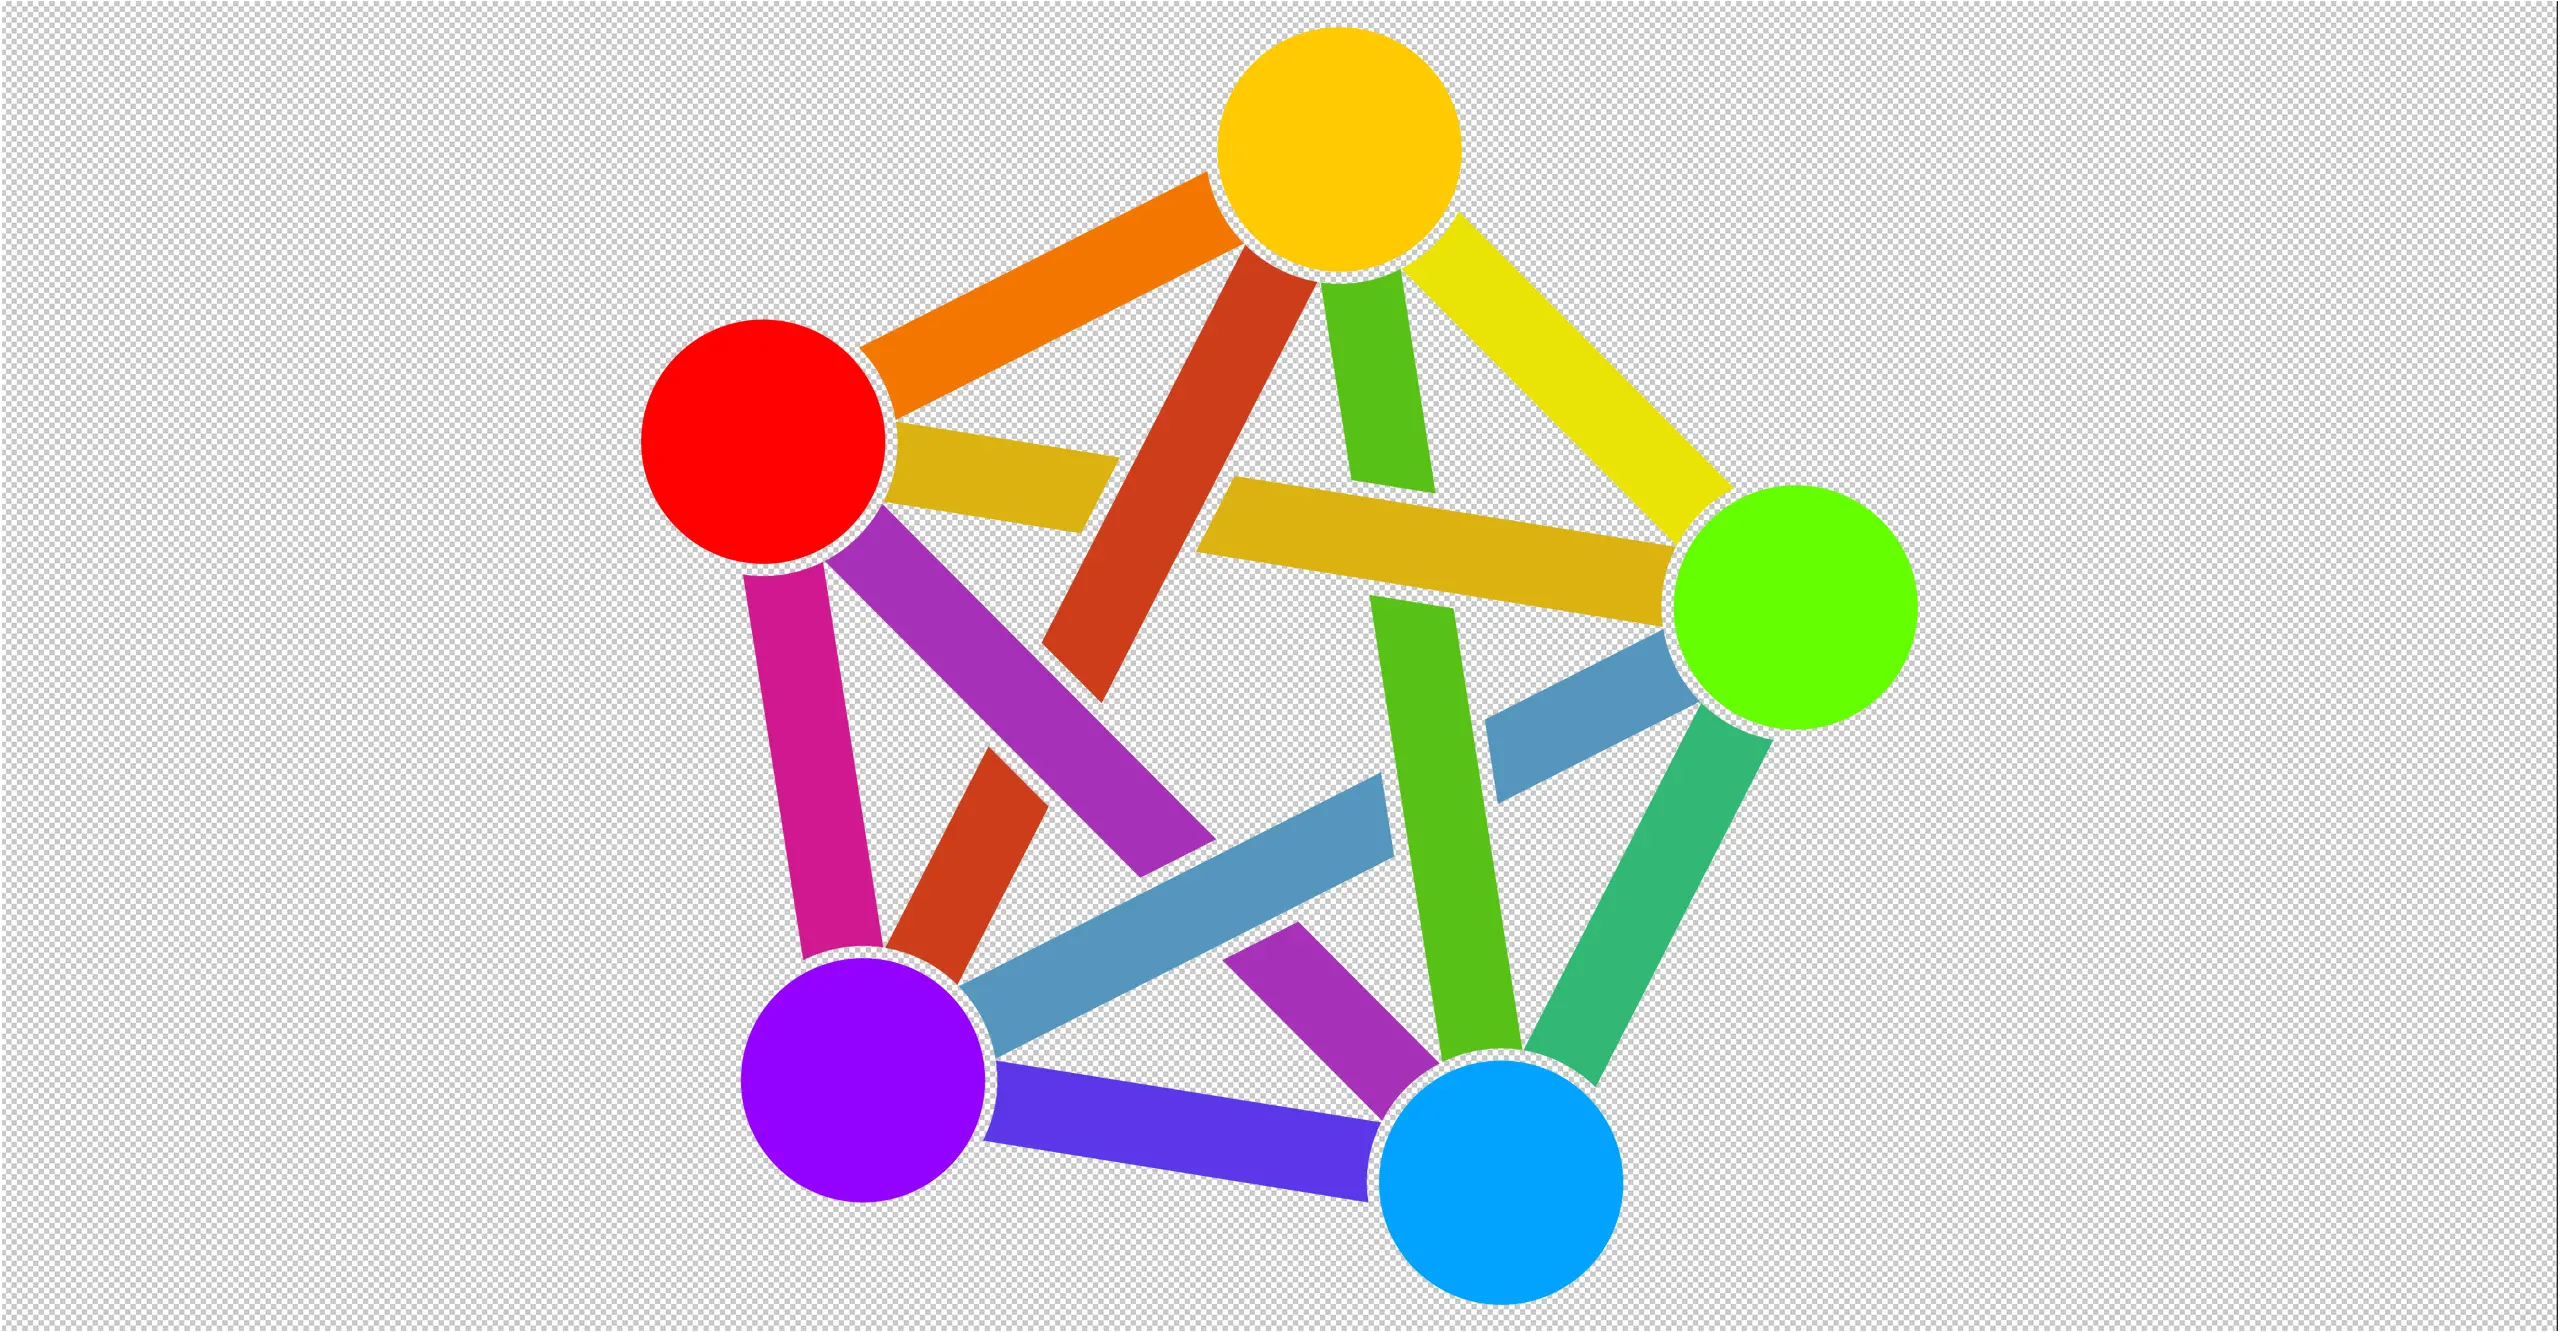 five nodes in pentagon shape with all diagonals, multicoloured over a grey and white squares background